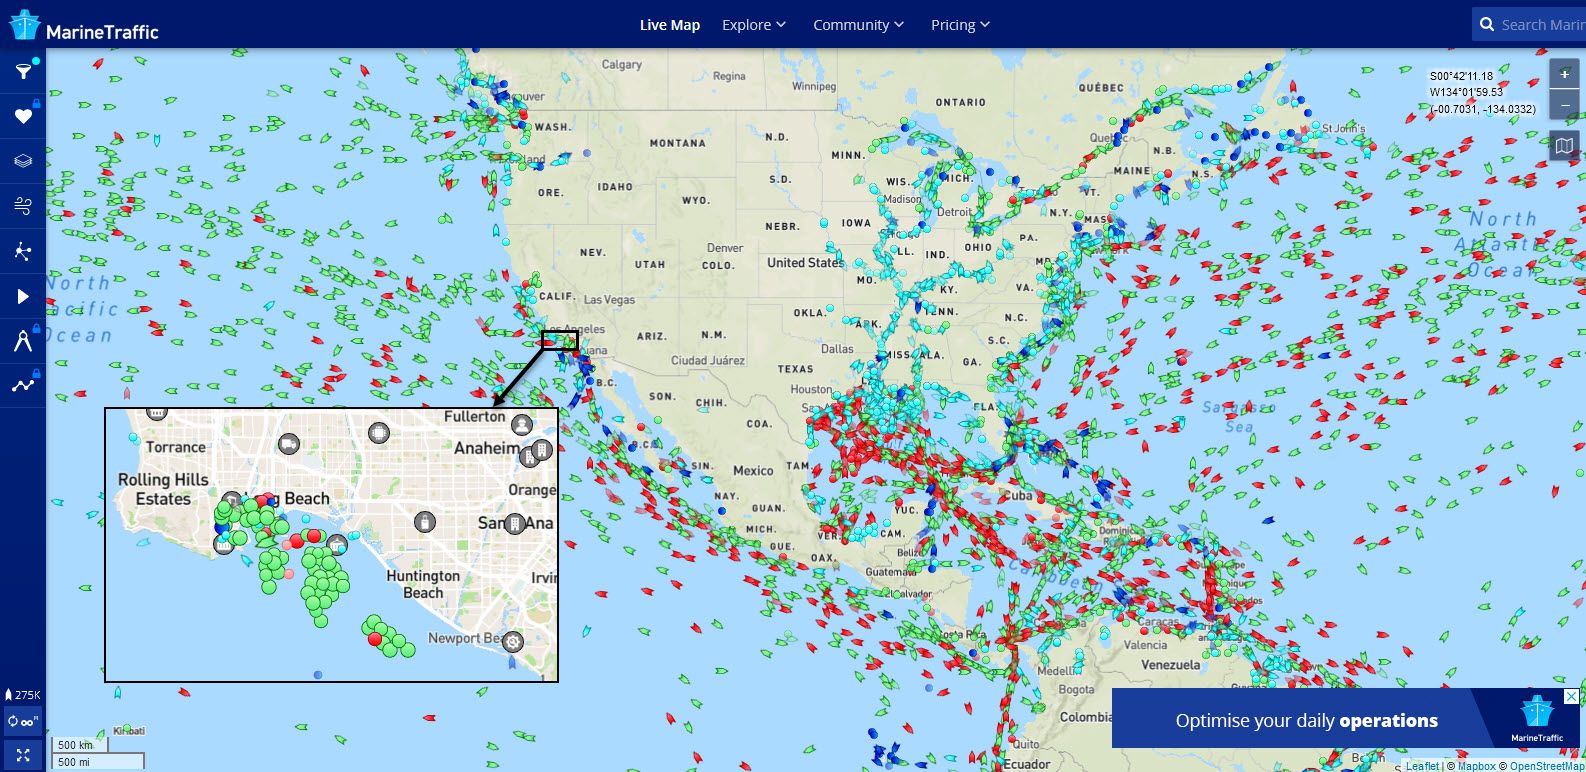 An Oct. 14 screenshot of the MarineTraffic website showing a similar region as the viral image. An enlarged view (inset) of traffic at the ports of Los Angeles and Long Beach shows a cluster of dot icons, which indicate ships that aren’t moving. The green dots indicate cargo ships sitting still.